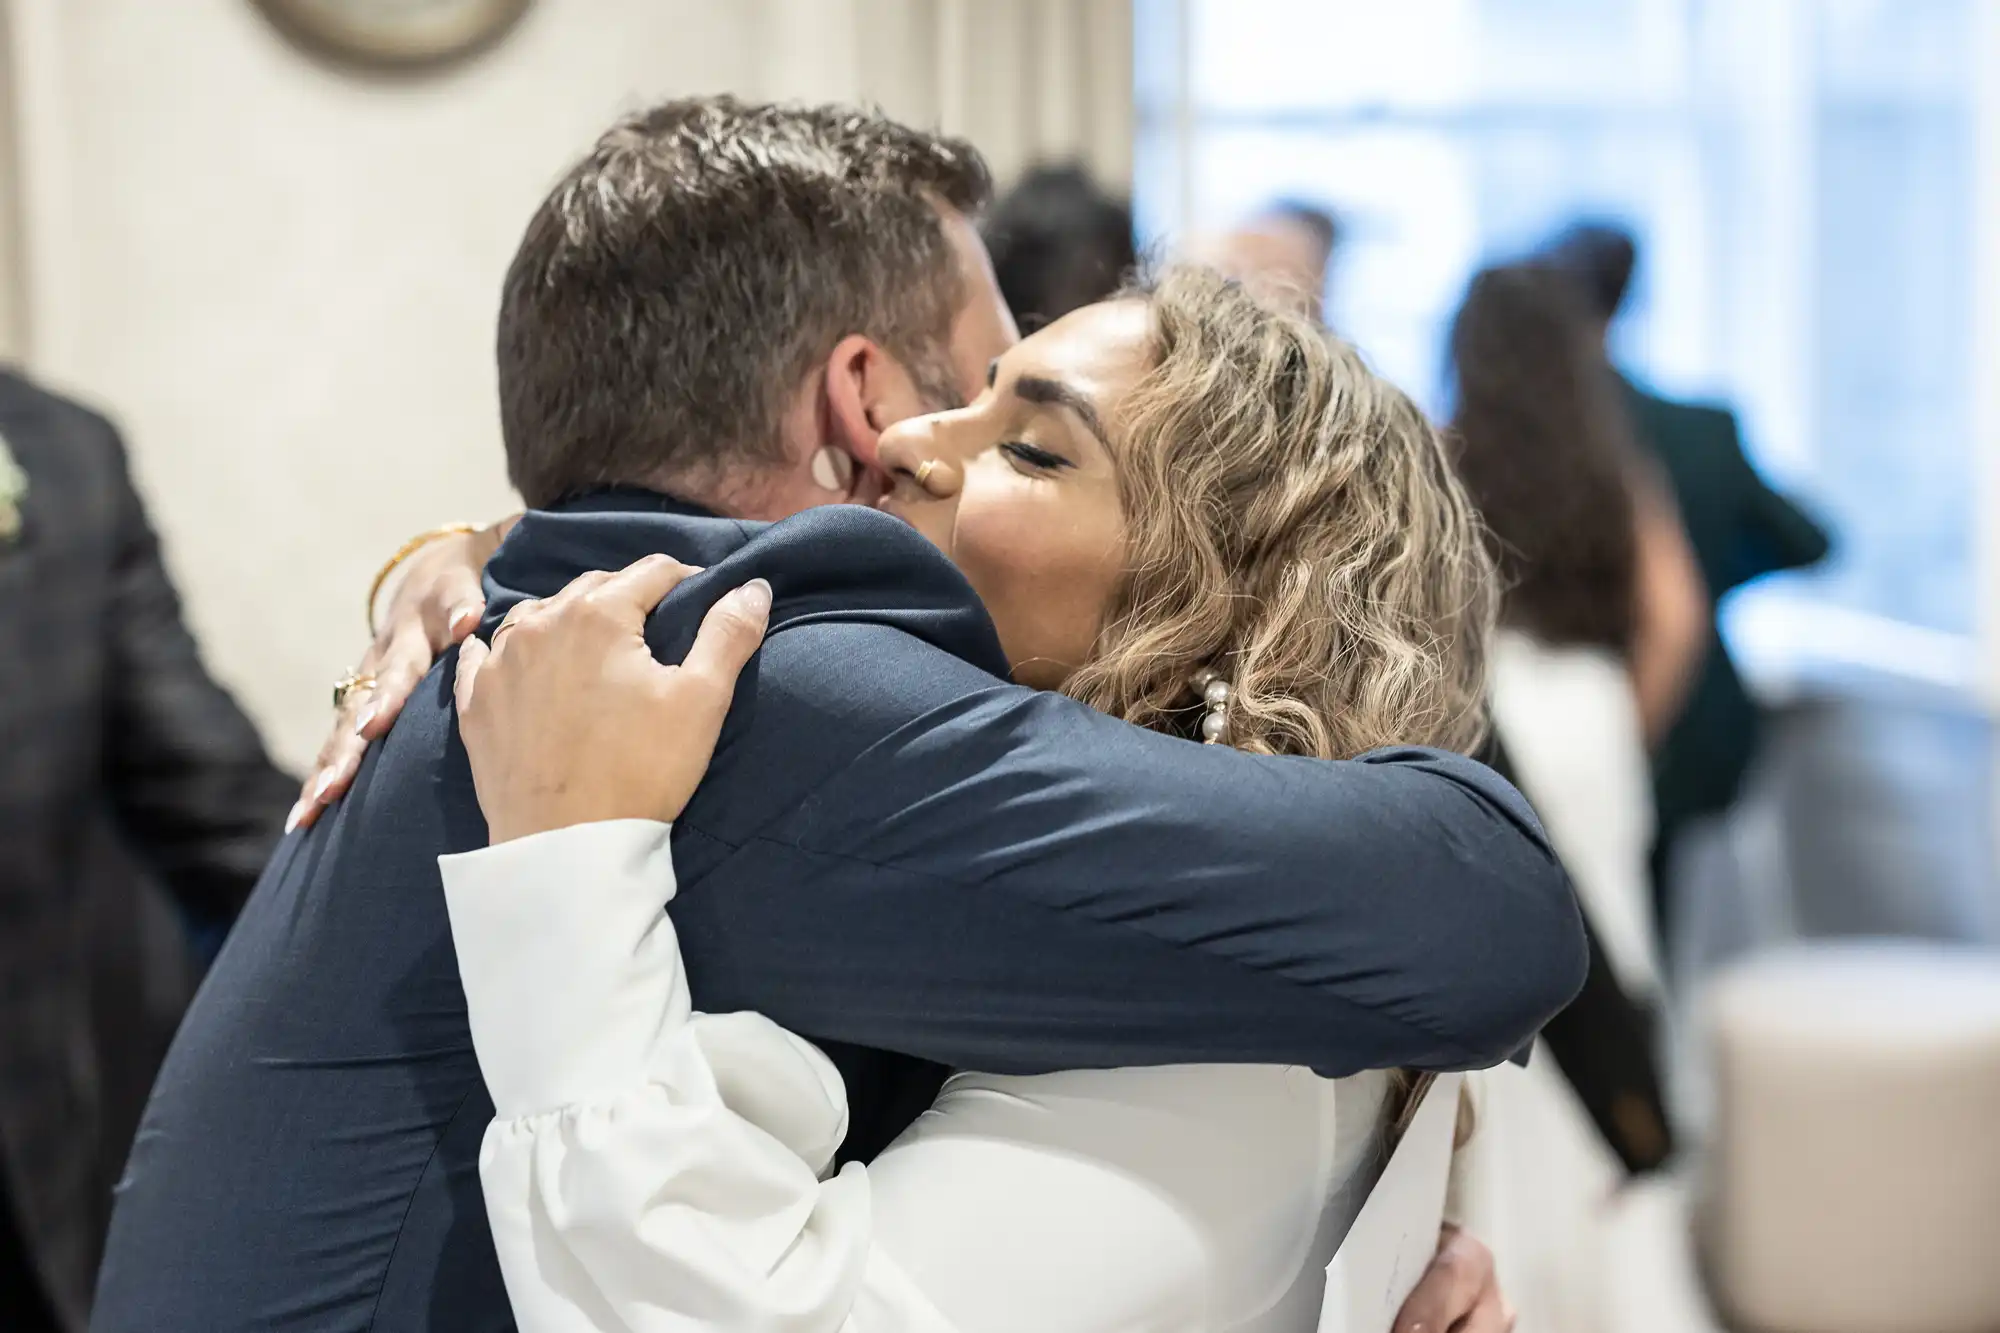 Two people are embracing in a hug at what appears to be an indoor social event. The woman has curly hair and is wearing a white outfit, while the man is dressed in a dark suit. Other attendees are visible in the background.